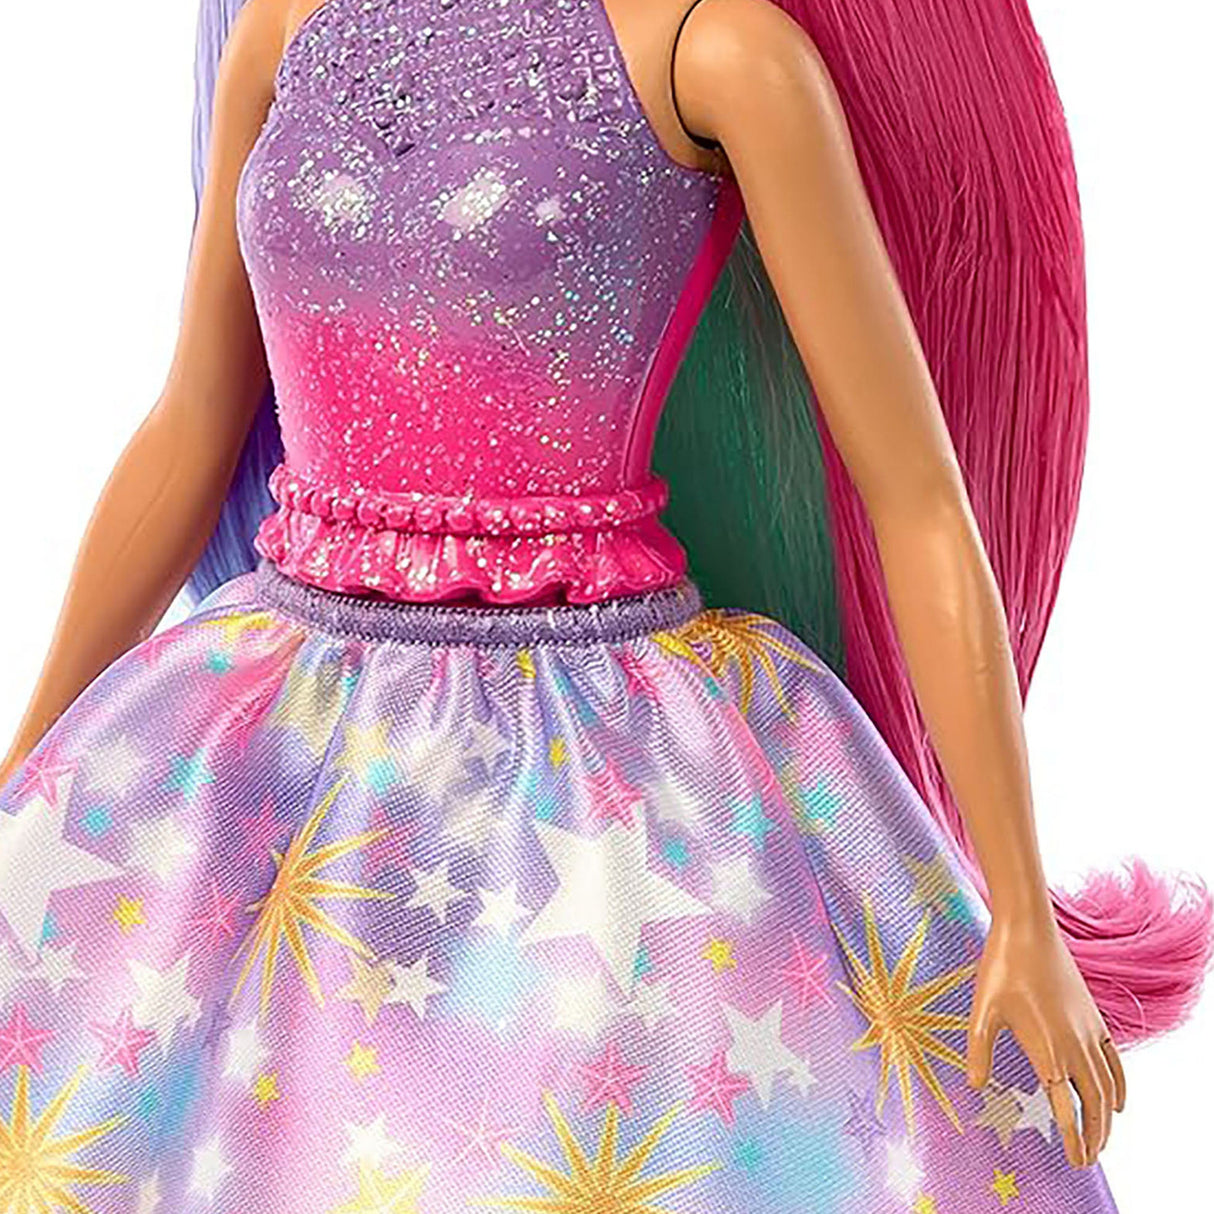 Barbie A Touch of Magic Dolls with Fairytale Outfits Glyph